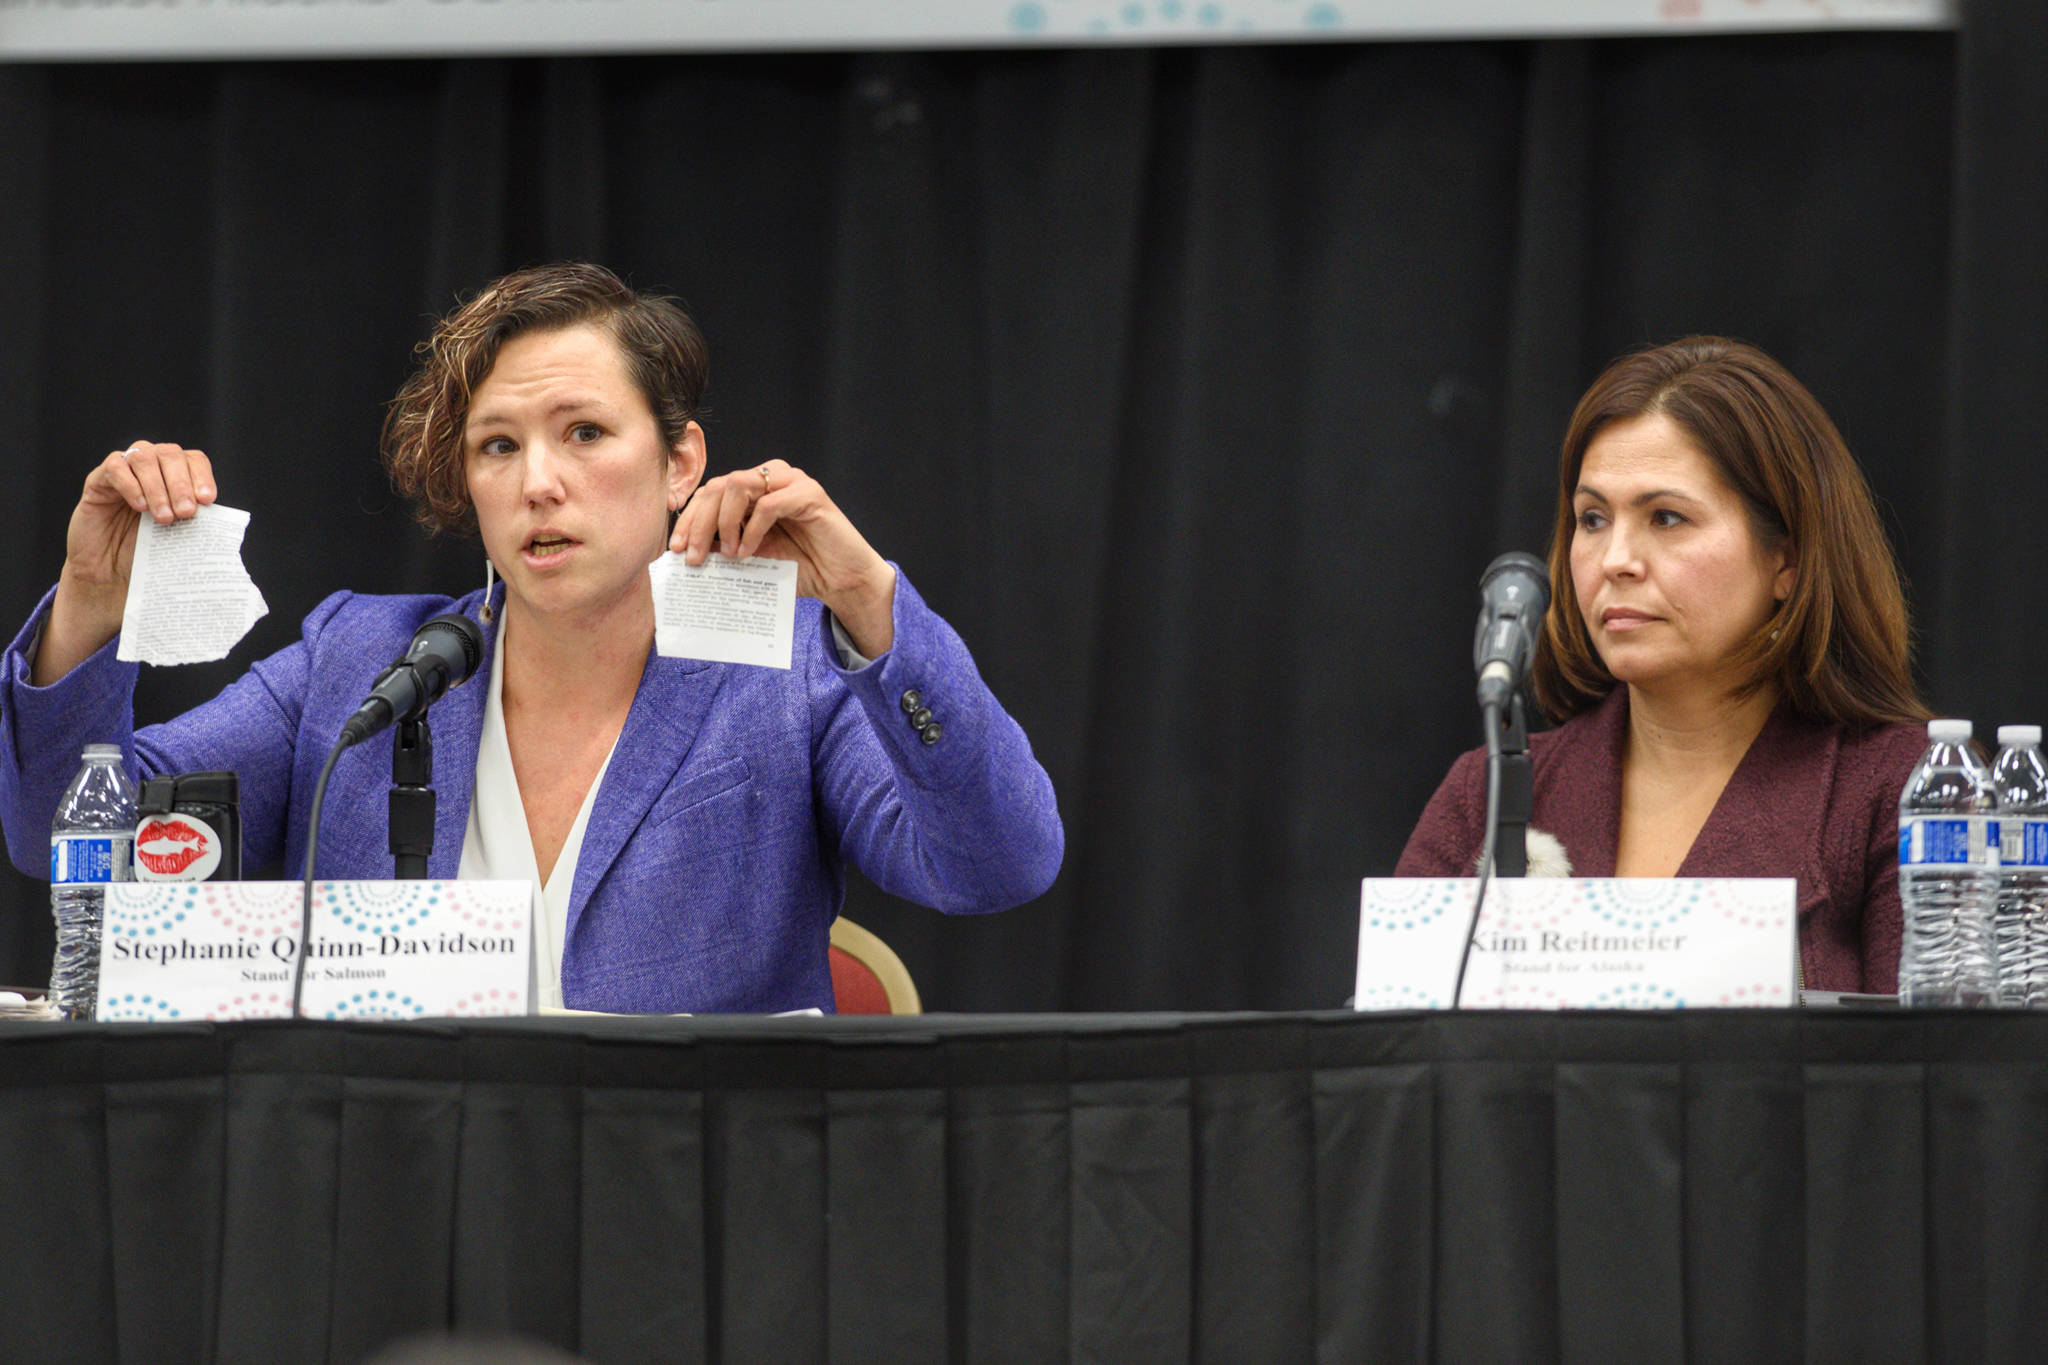 Stephanie Quinn-Davidson, left, of Yes for Salmon, holds up what she says is habitat protection regulation as she debates the merits of Ballot Measure 1 with Kim Reitmeier, representing Stand for Alaska, during a Get Out the Native Vote Southeast forum at Elizabeth Peratrovich Hall on Tuesday, Oct. 9, 2018. (Michael Penn | Juneau Empire)                                Stephanie Quinn-Davidson, left, of Yes for Salmon, holds up what she says is habitat protection regulation as she debates the merits of Ballot Measure 1 with Kim Reitmeier, representing Stand for Alaska, during a Get Out the Native Vote Southeast forum at Elizabeth Peratrovich Hall on Tuesday, Oct. 9, 2018. (Michael Penn | Juneau Empire)